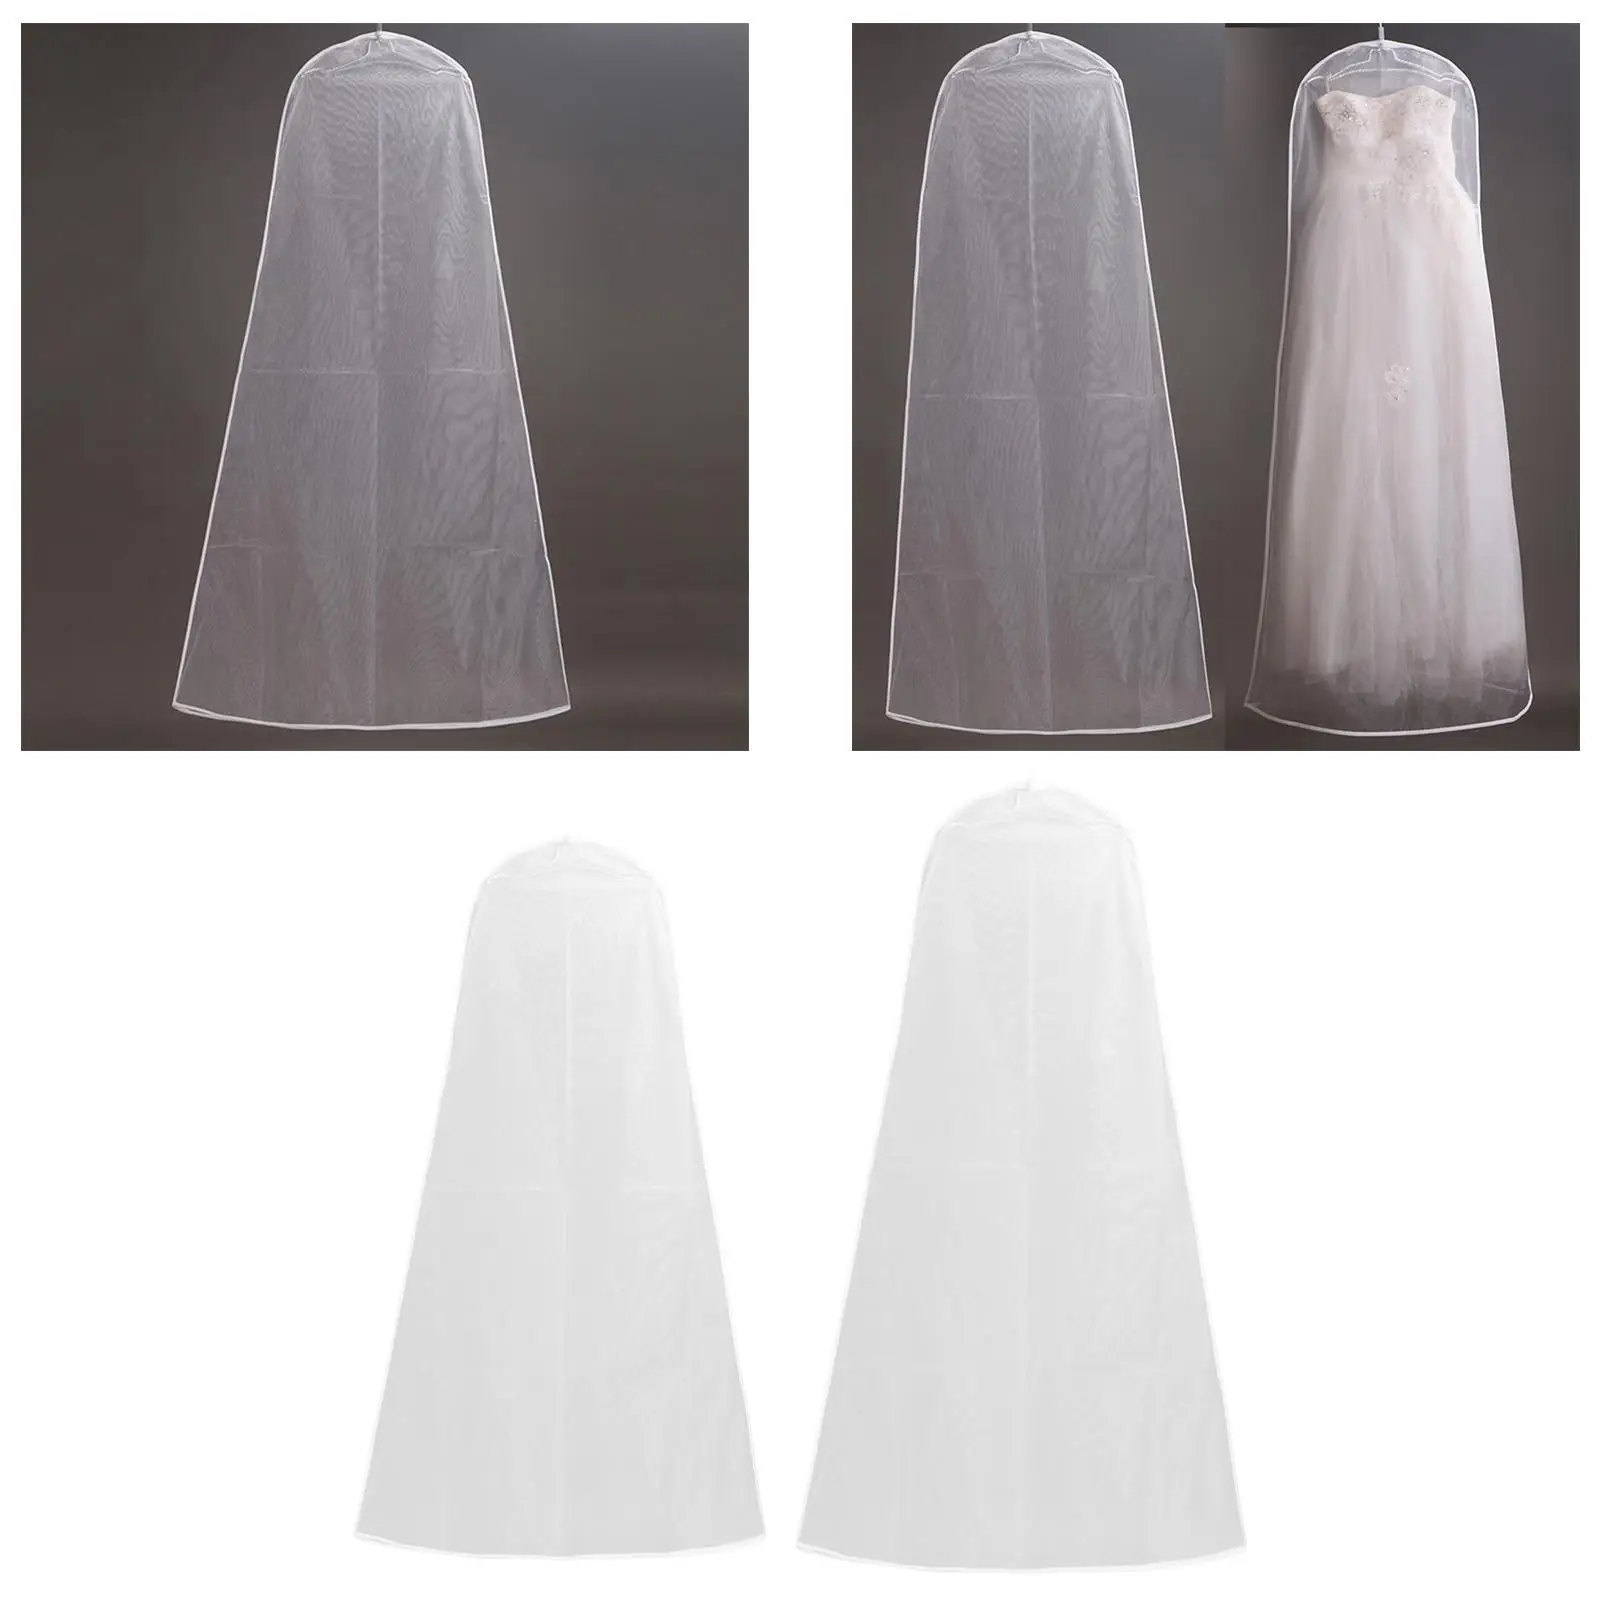 Pullover Wedding Dress Garment Bag Cover Washable Storage Bag Dustproof Covers for Evening Gown Windbreakers Down Jackets